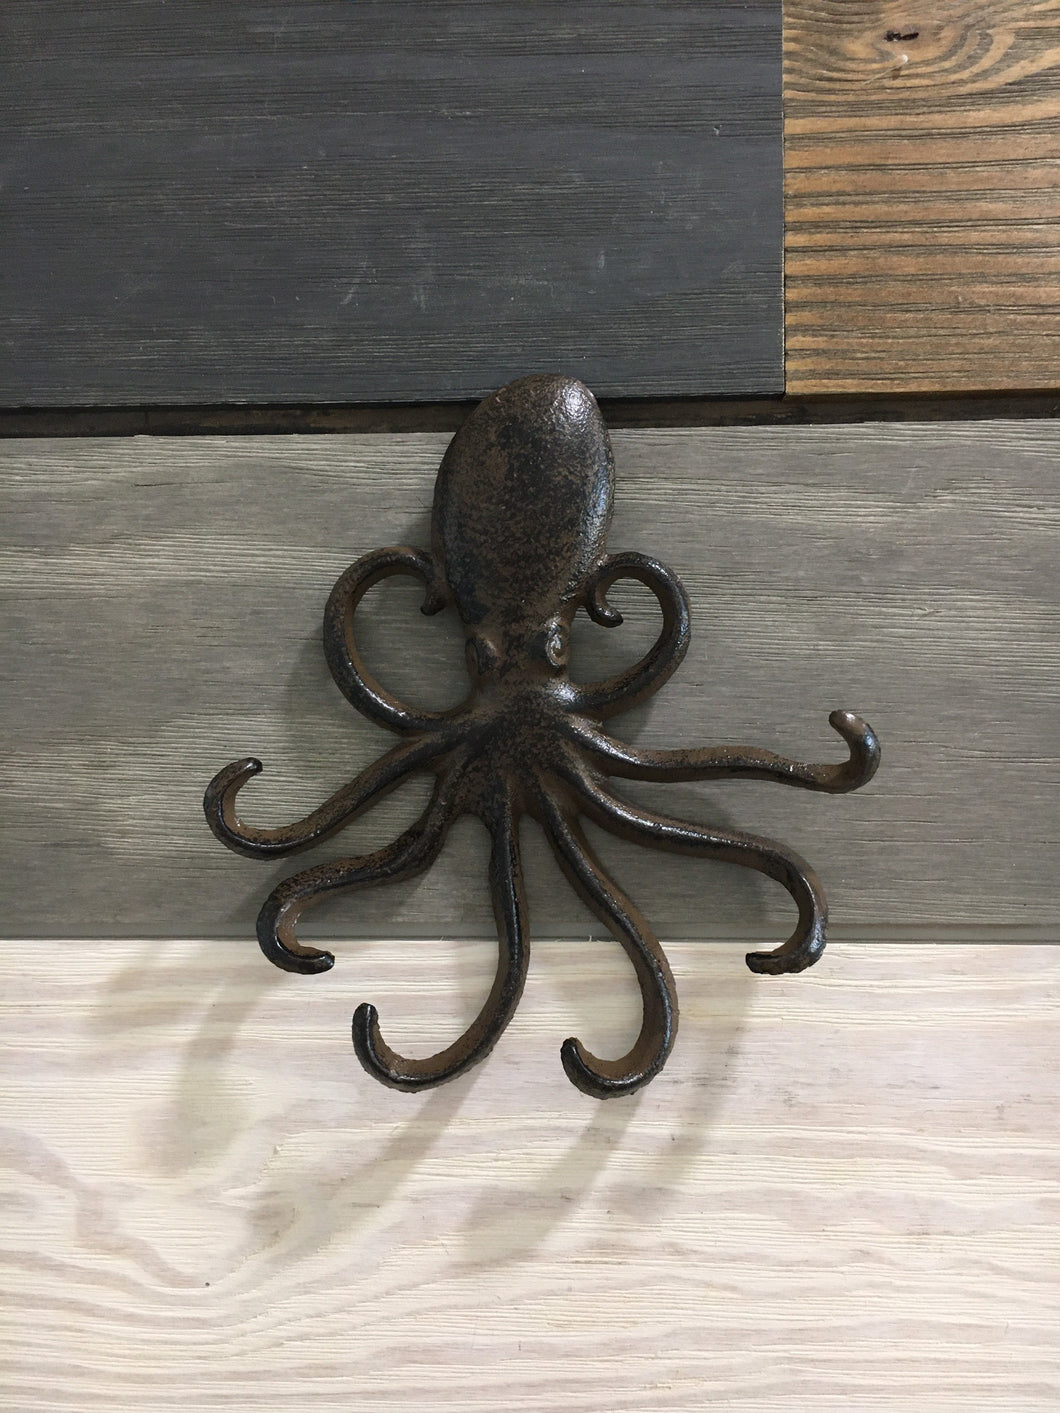 Cast Iron Octopus Wall Hook, Bedroom Wall Hanger, Coatroom Organizer, Outdoor Space Saver, Storage System, Wall Hanging, Beach Decor, Gift